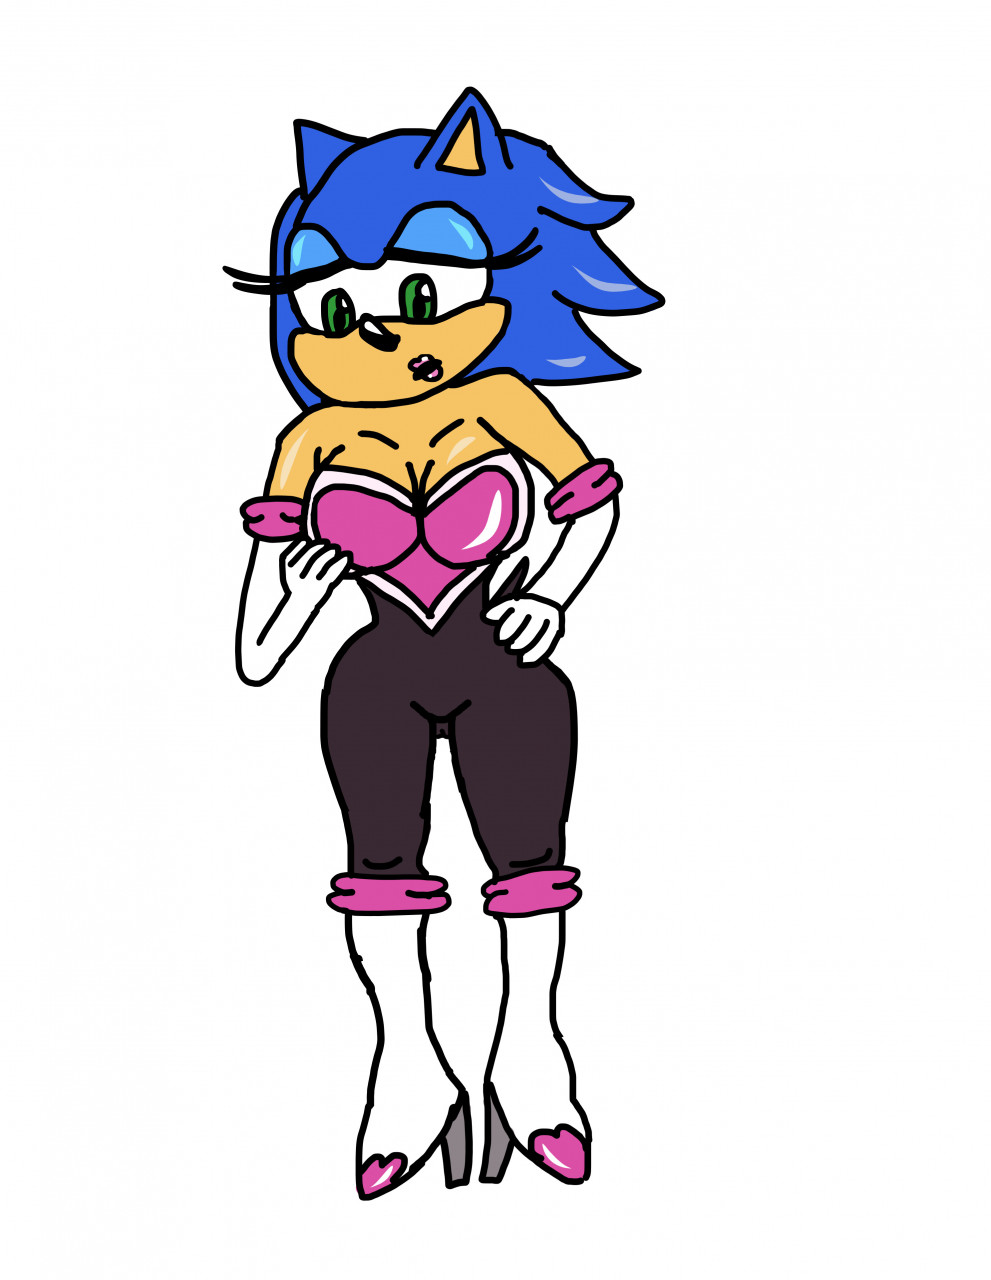 Fanart of female sonic the hedgehog and rouge